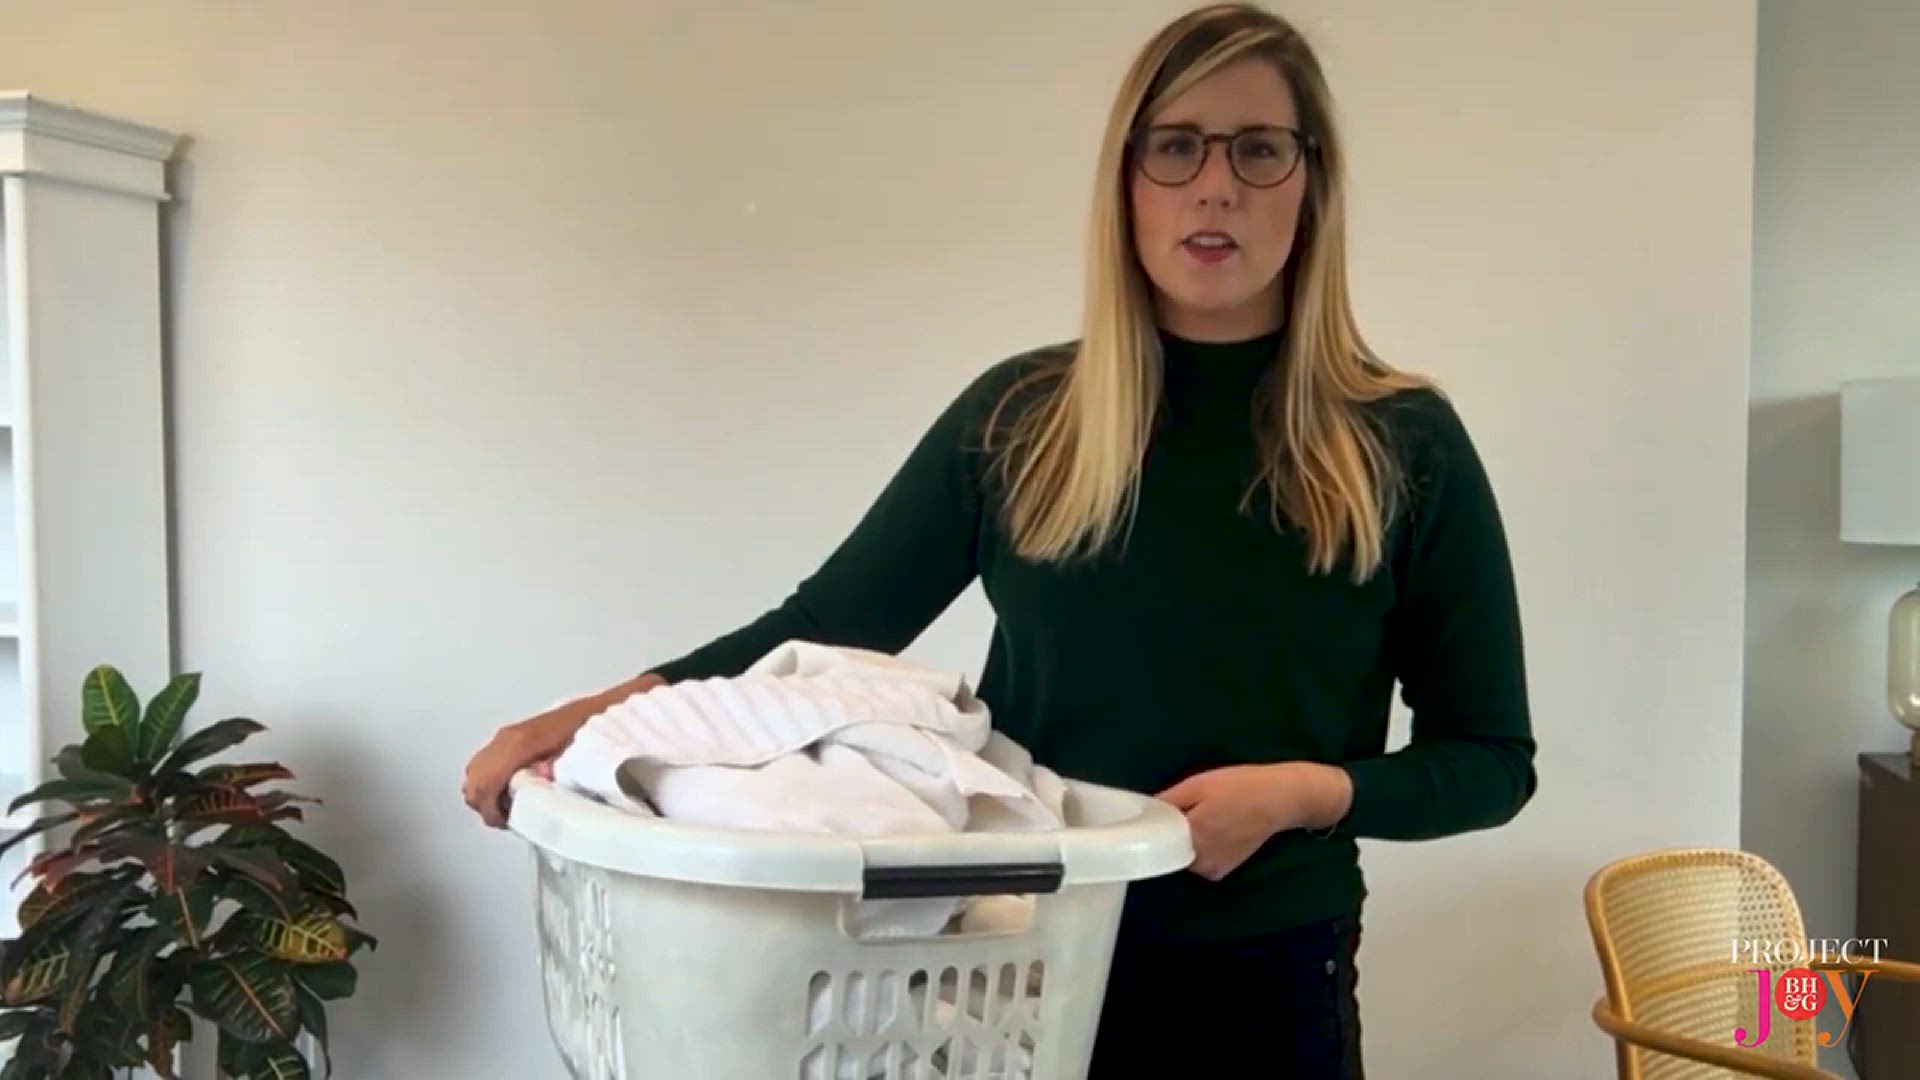 Sheets Laundry - Sustainable Cleaning Products - Shark Tank Blog